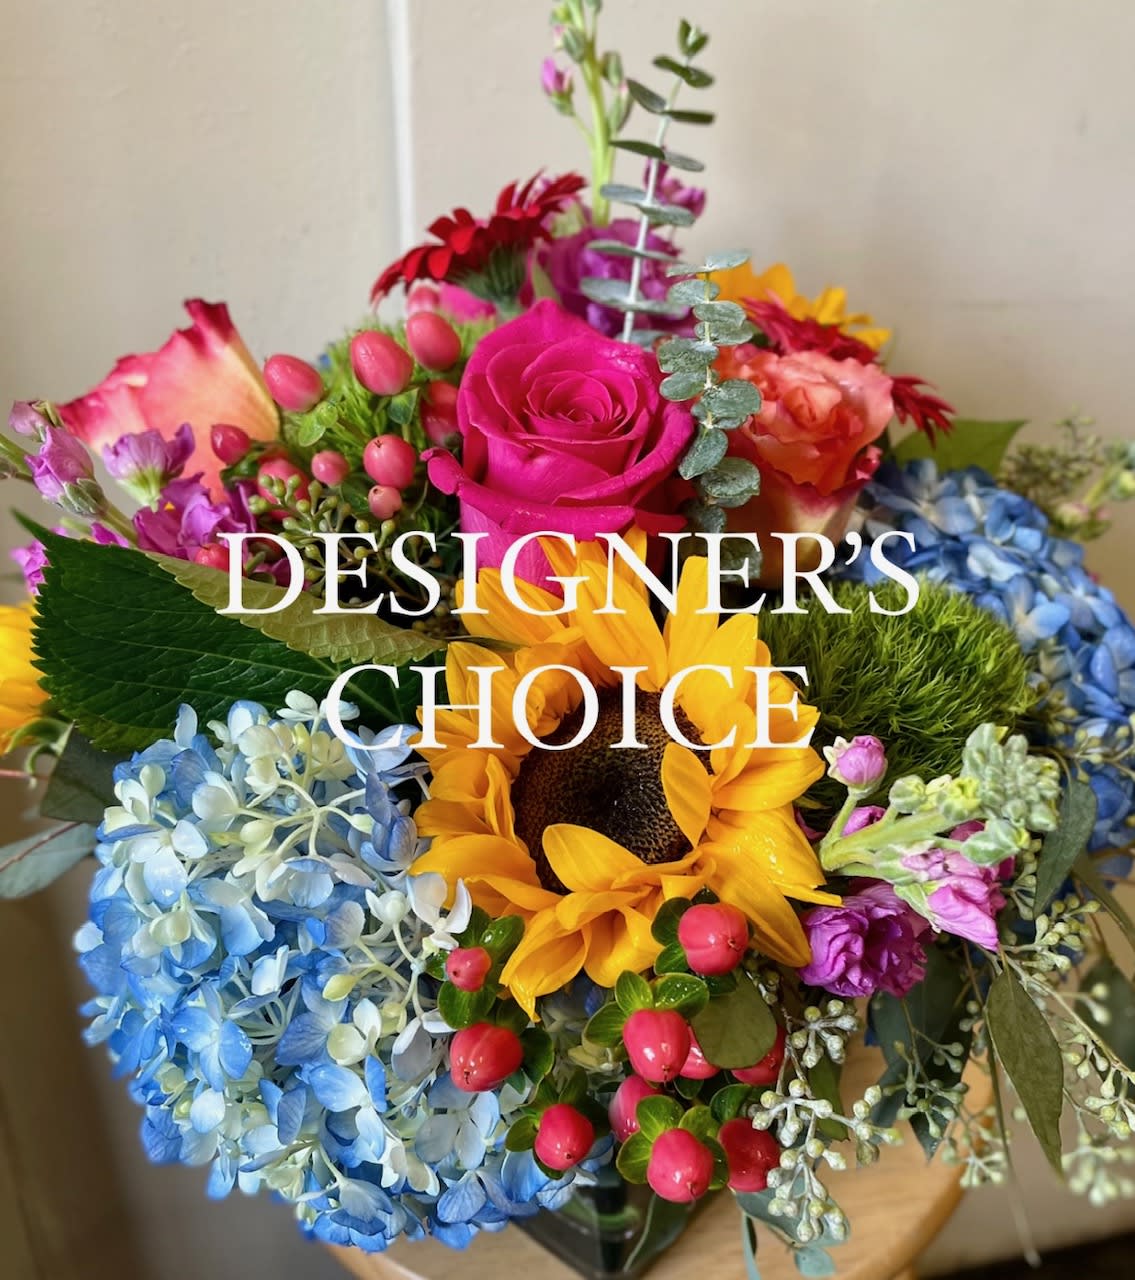 Designer's Choice - Let the Designer choose for you!! Beautiful seasonal flowers perfect for any occasion!